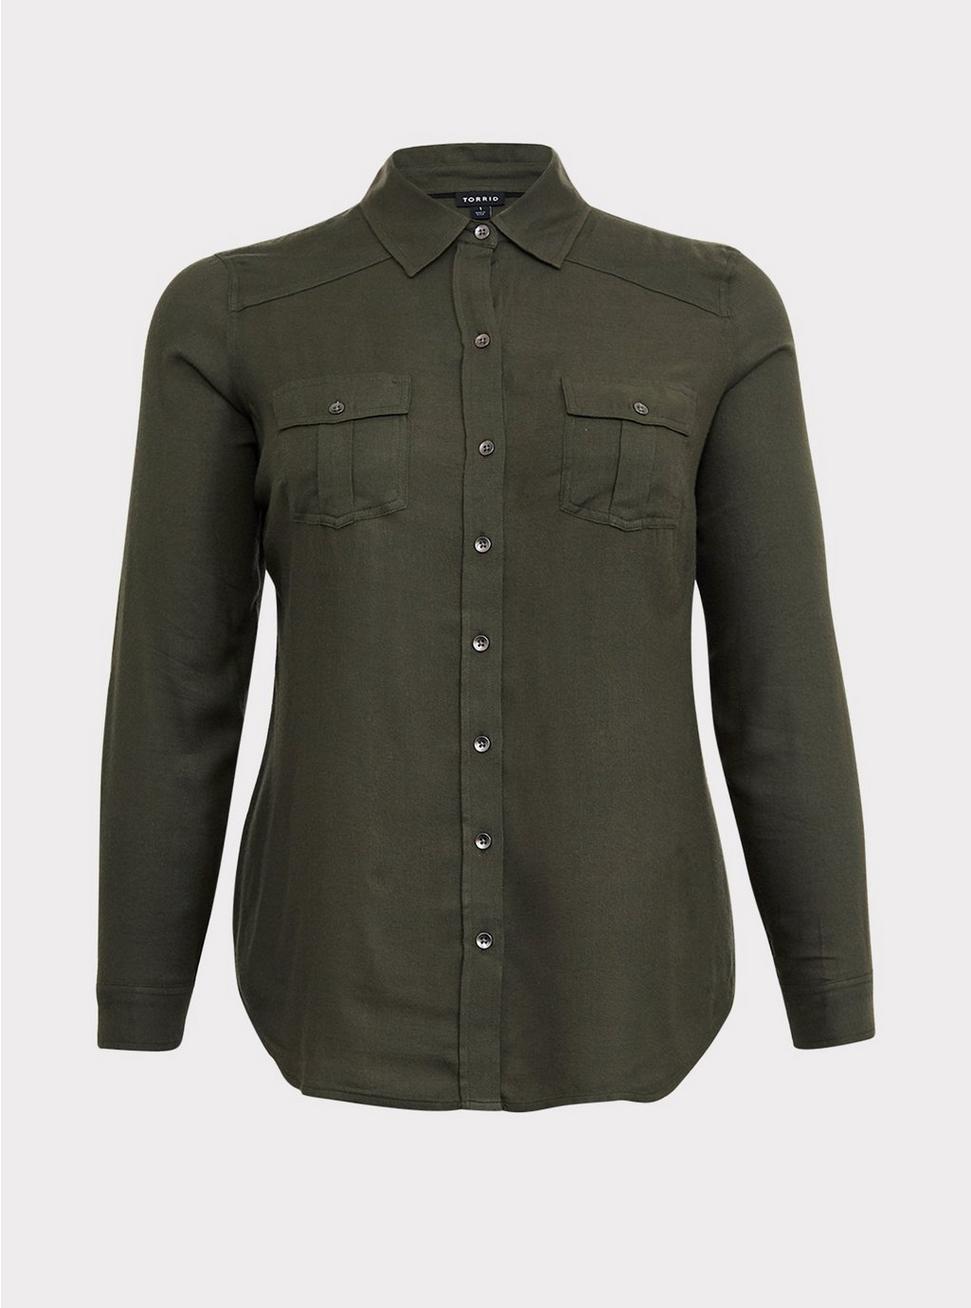 Plus Size - Olive Green Twill Button Front Utility Shirt - Torrid